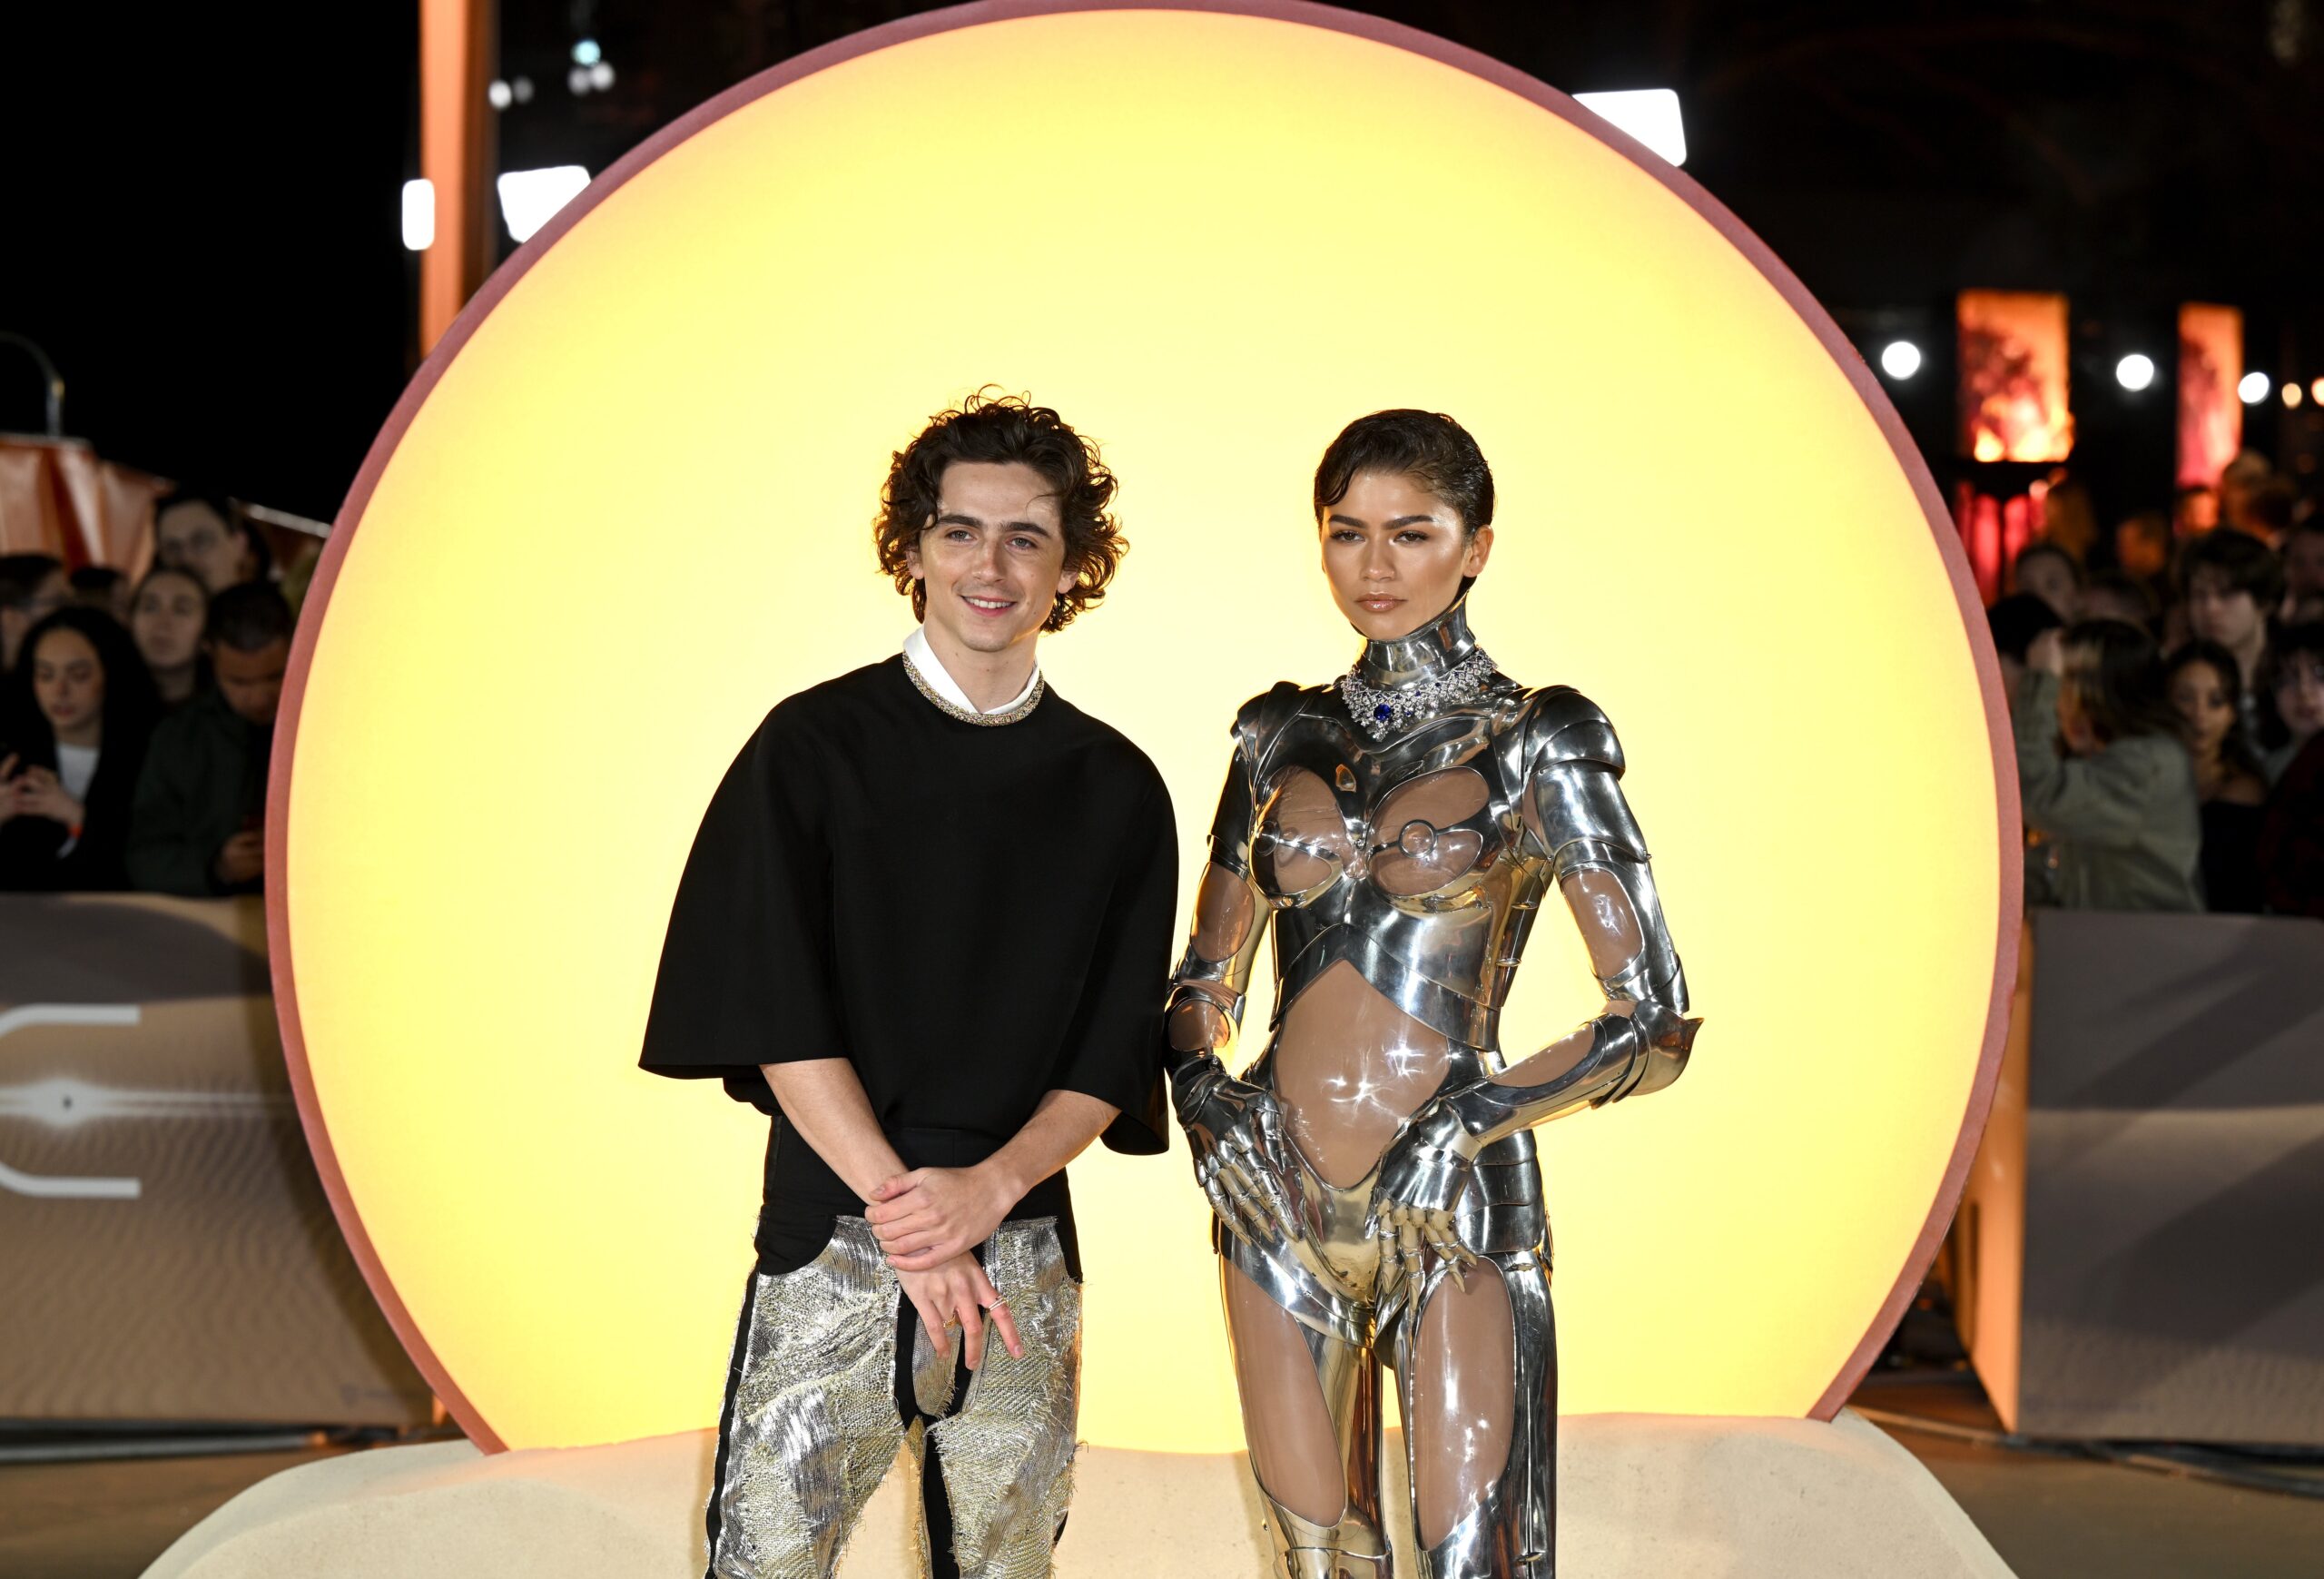 Timothee Chalamet and Zendaya on the 'Dune: Part 2' red carpet illuminated by a glowing yellow circle behind them.